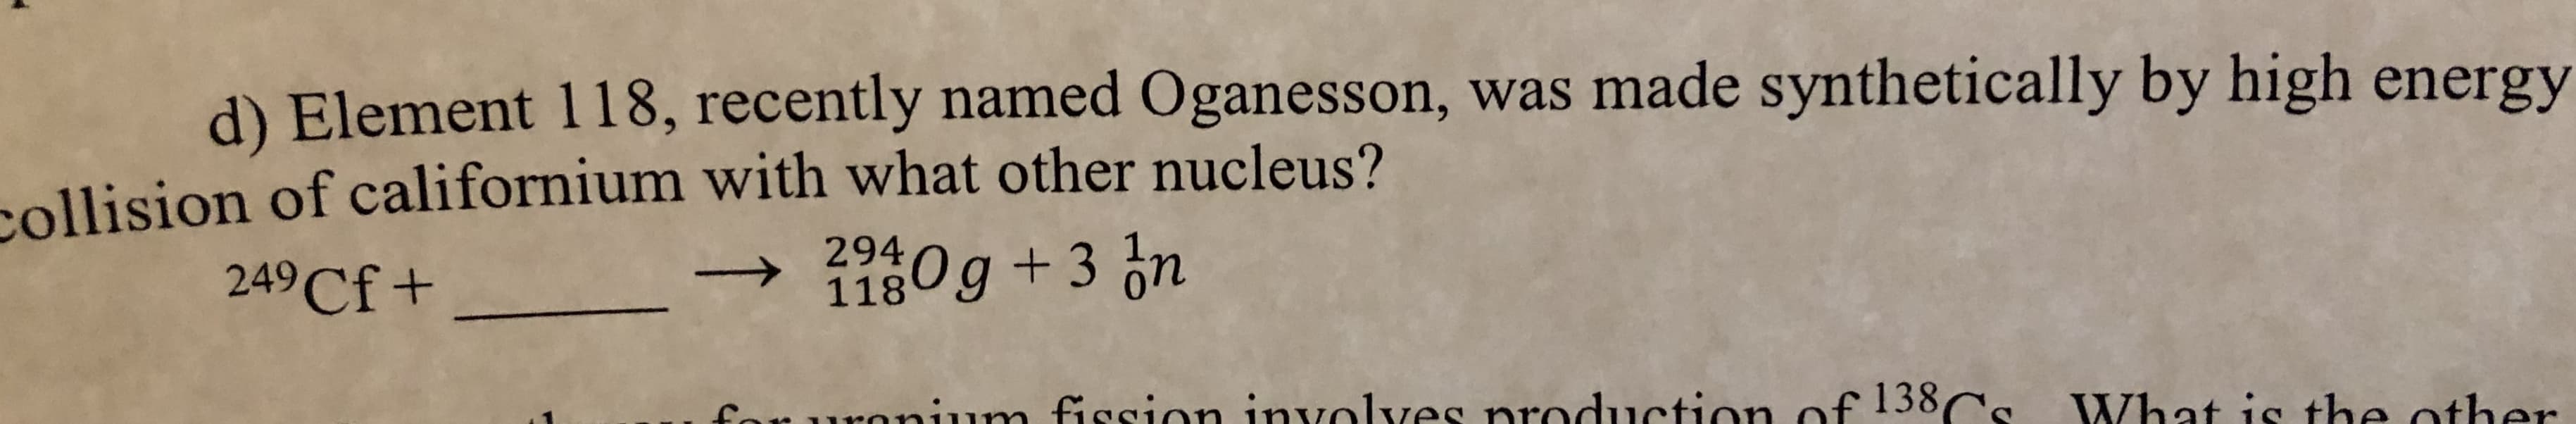 d) Element 118, recently named Oganesson, was made synthetically by high energy
kollision of californium with what other nucleus?
294
118
0g +3 ón
249Cf+
onium fiosion involves production of 138Cs What is the other
